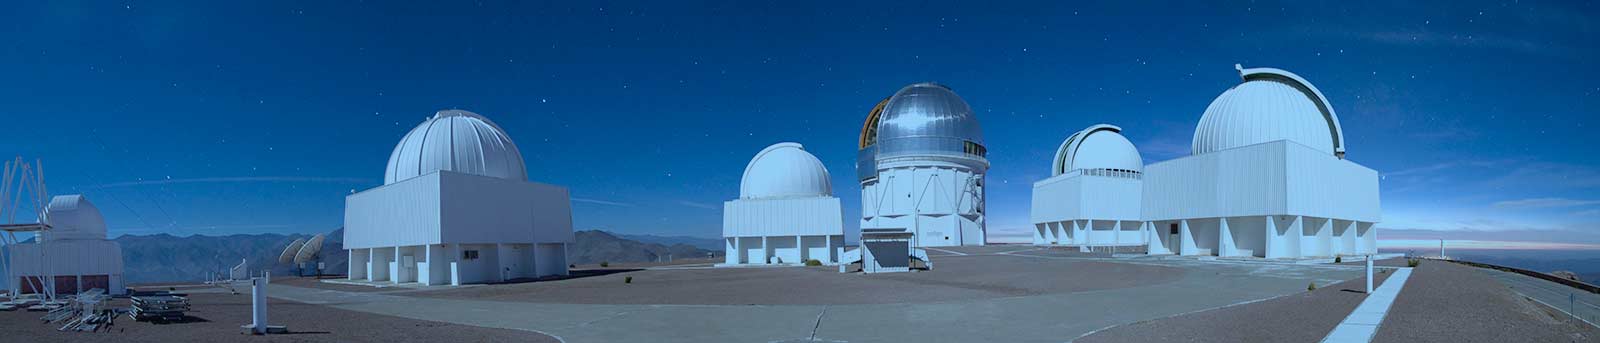 A long-exposure nighttime panorama of Cerro Tololo Inter-American Observatory in Chile CTIO